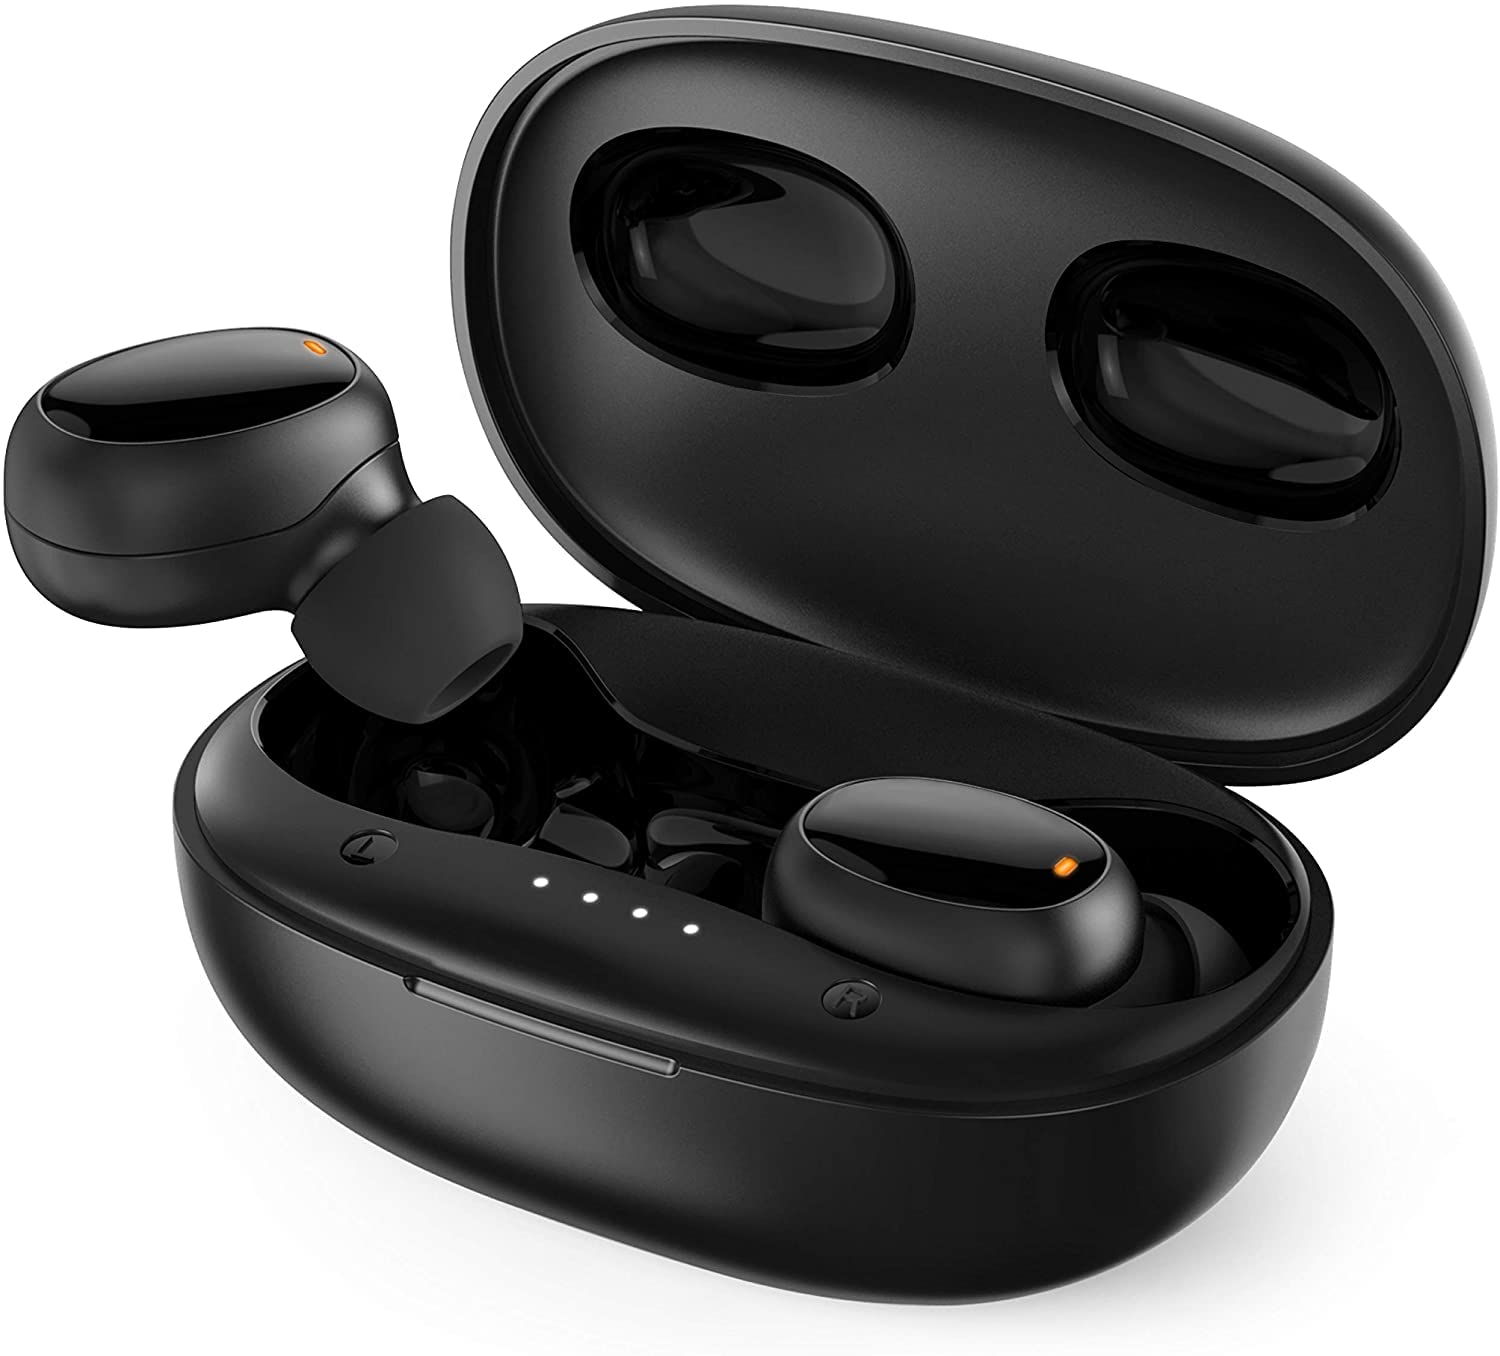 Connecting Wireless Earbuds to Your TV | CitizenSide